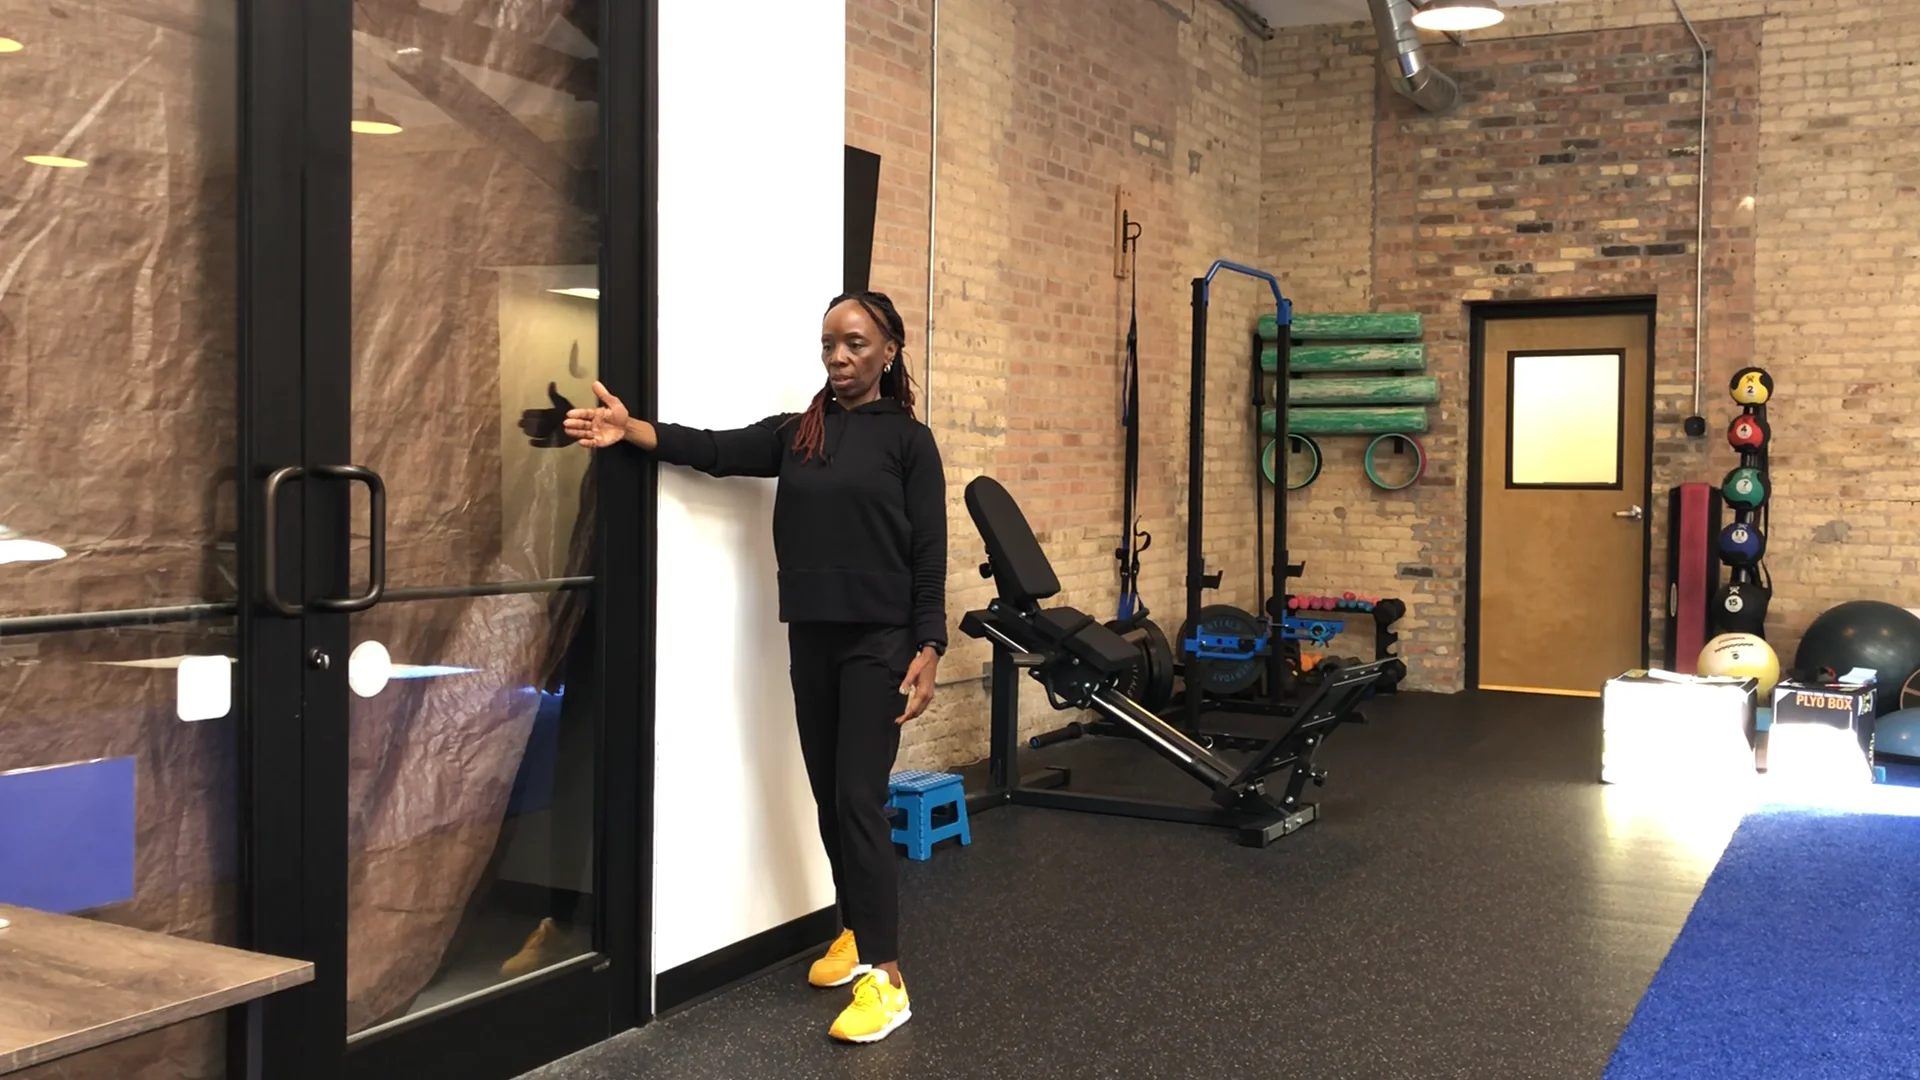 Hamstring Stretch with a Box, Door, or Wall